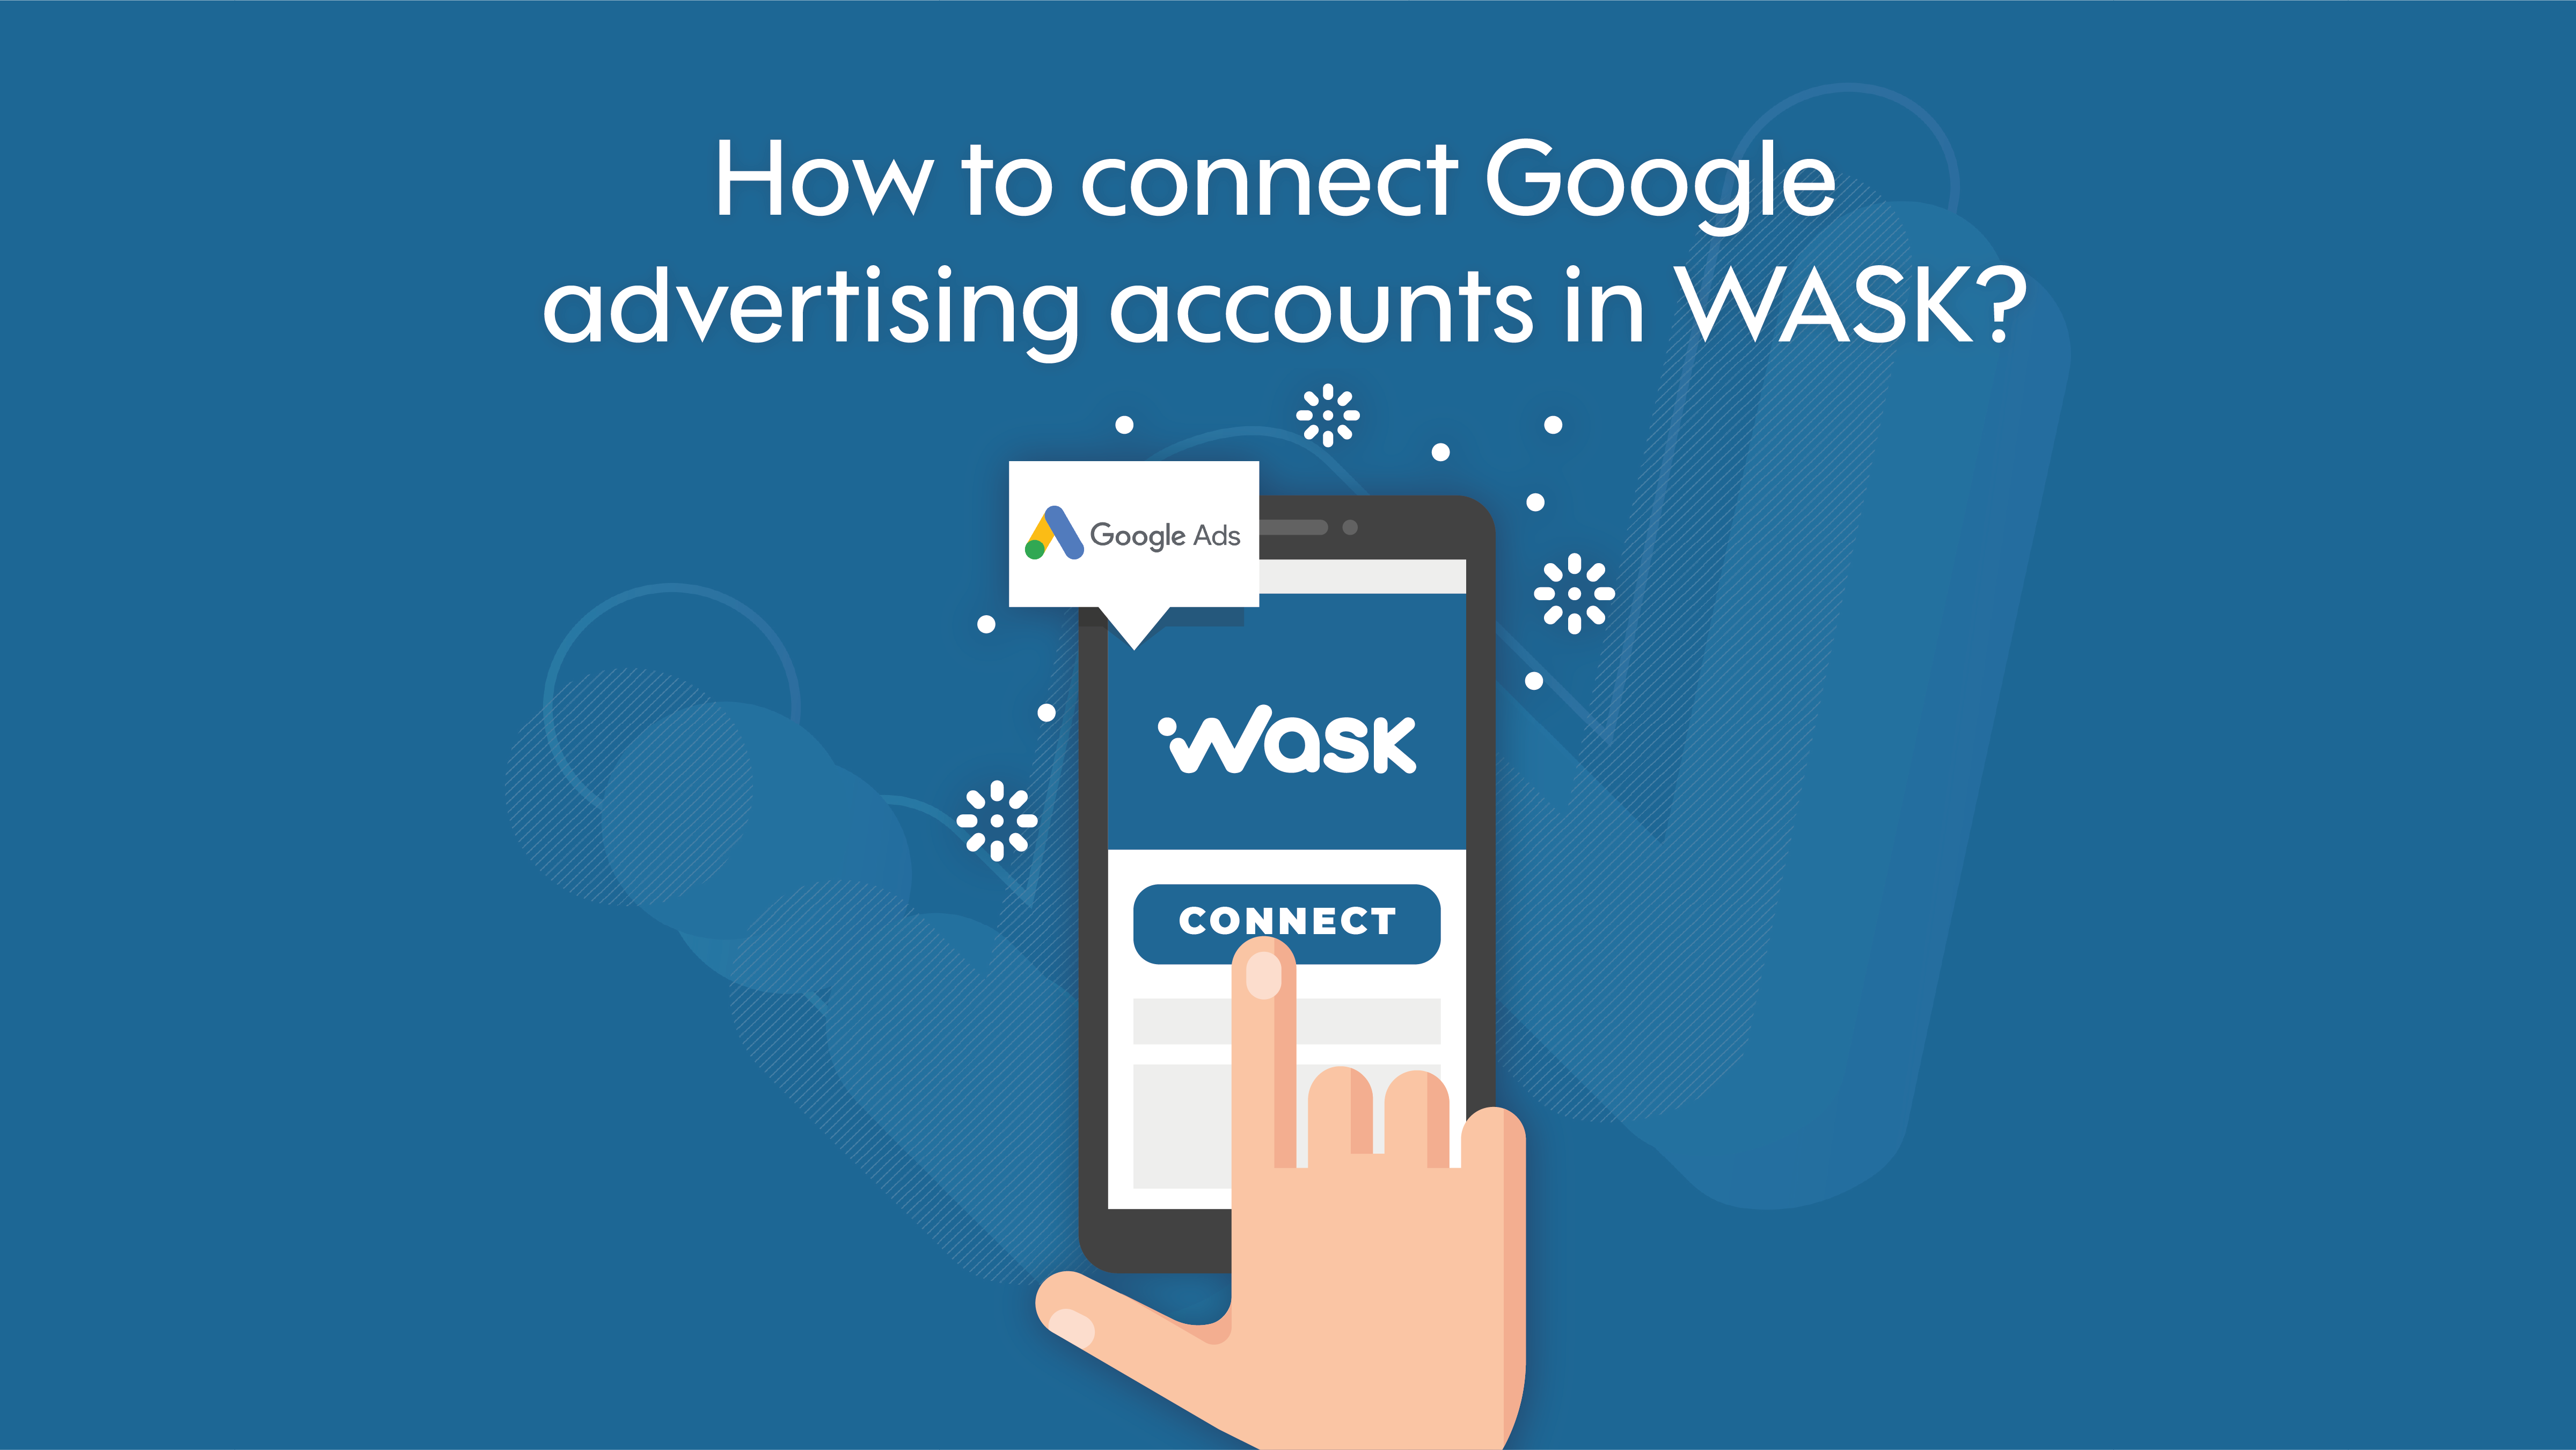 Connect Google Advertising Accounts in WASK